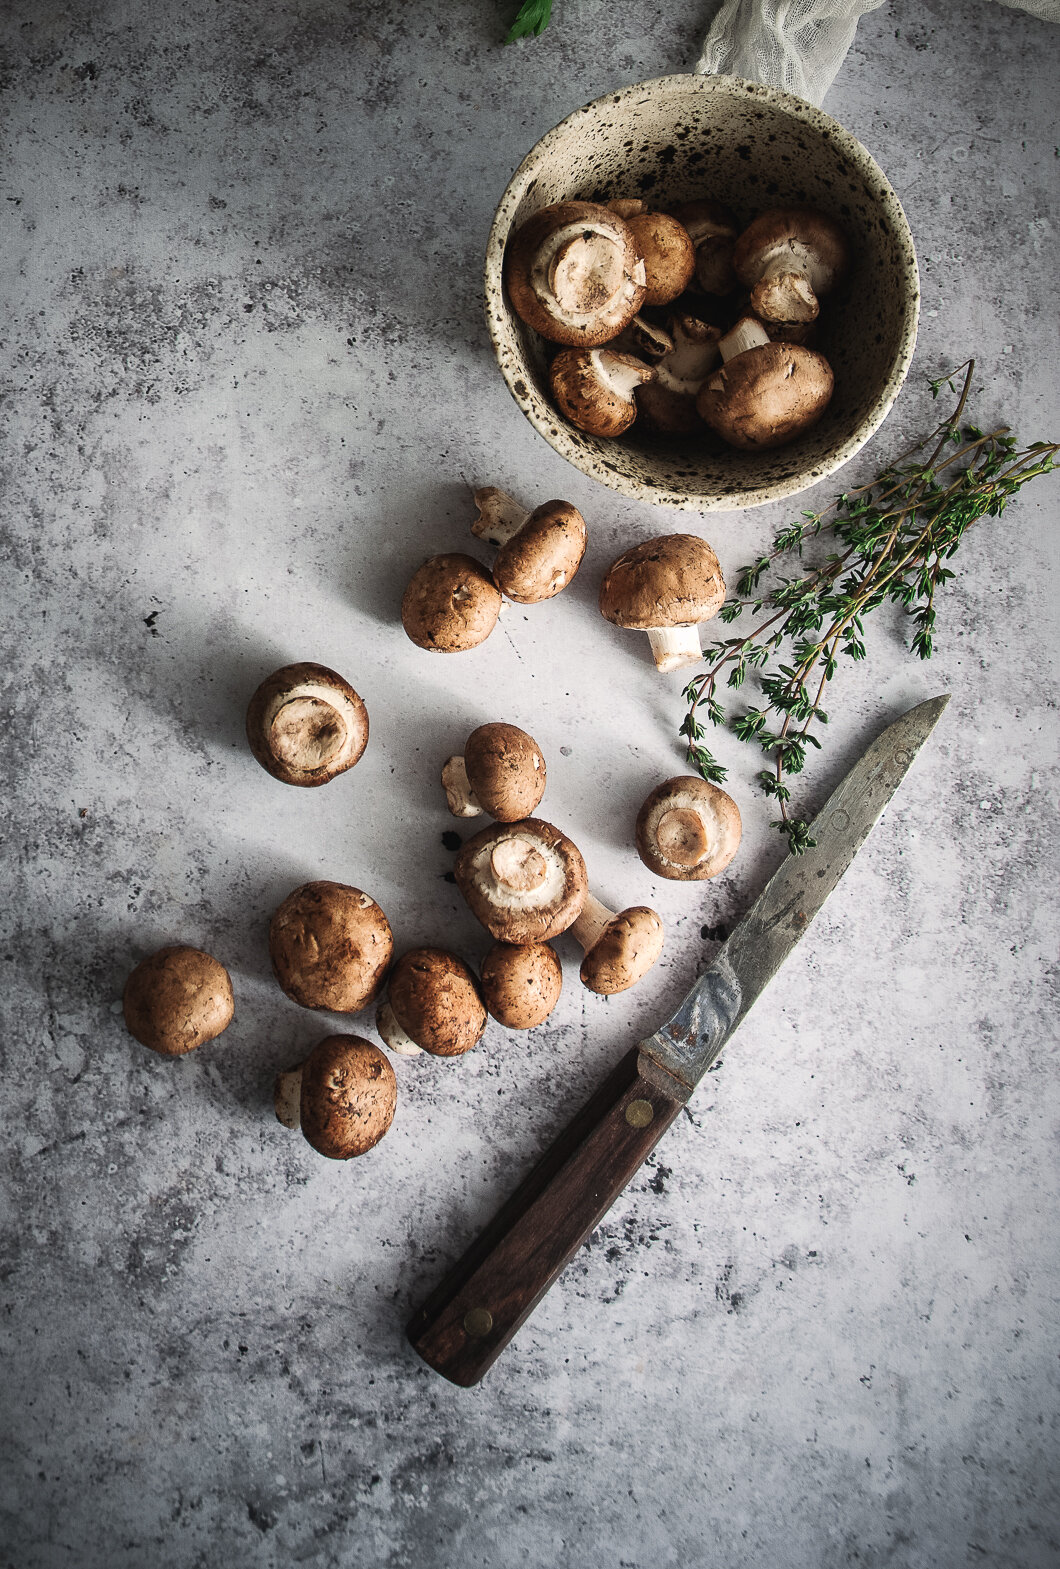 Mushrooms with knife, thyme and bowl